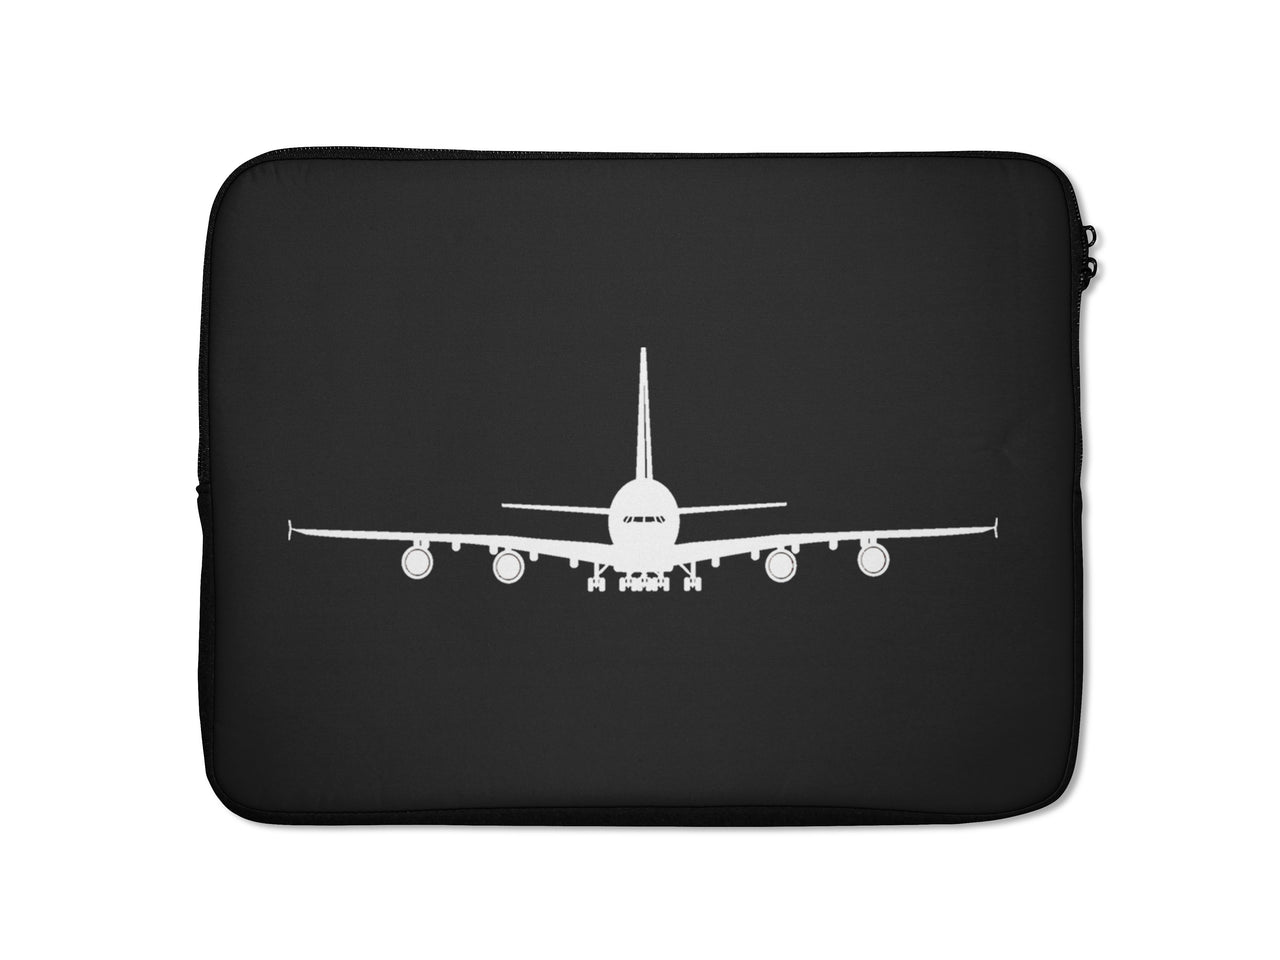 Airbus A380 Silhouette Designed Laptop & Tablet Cases